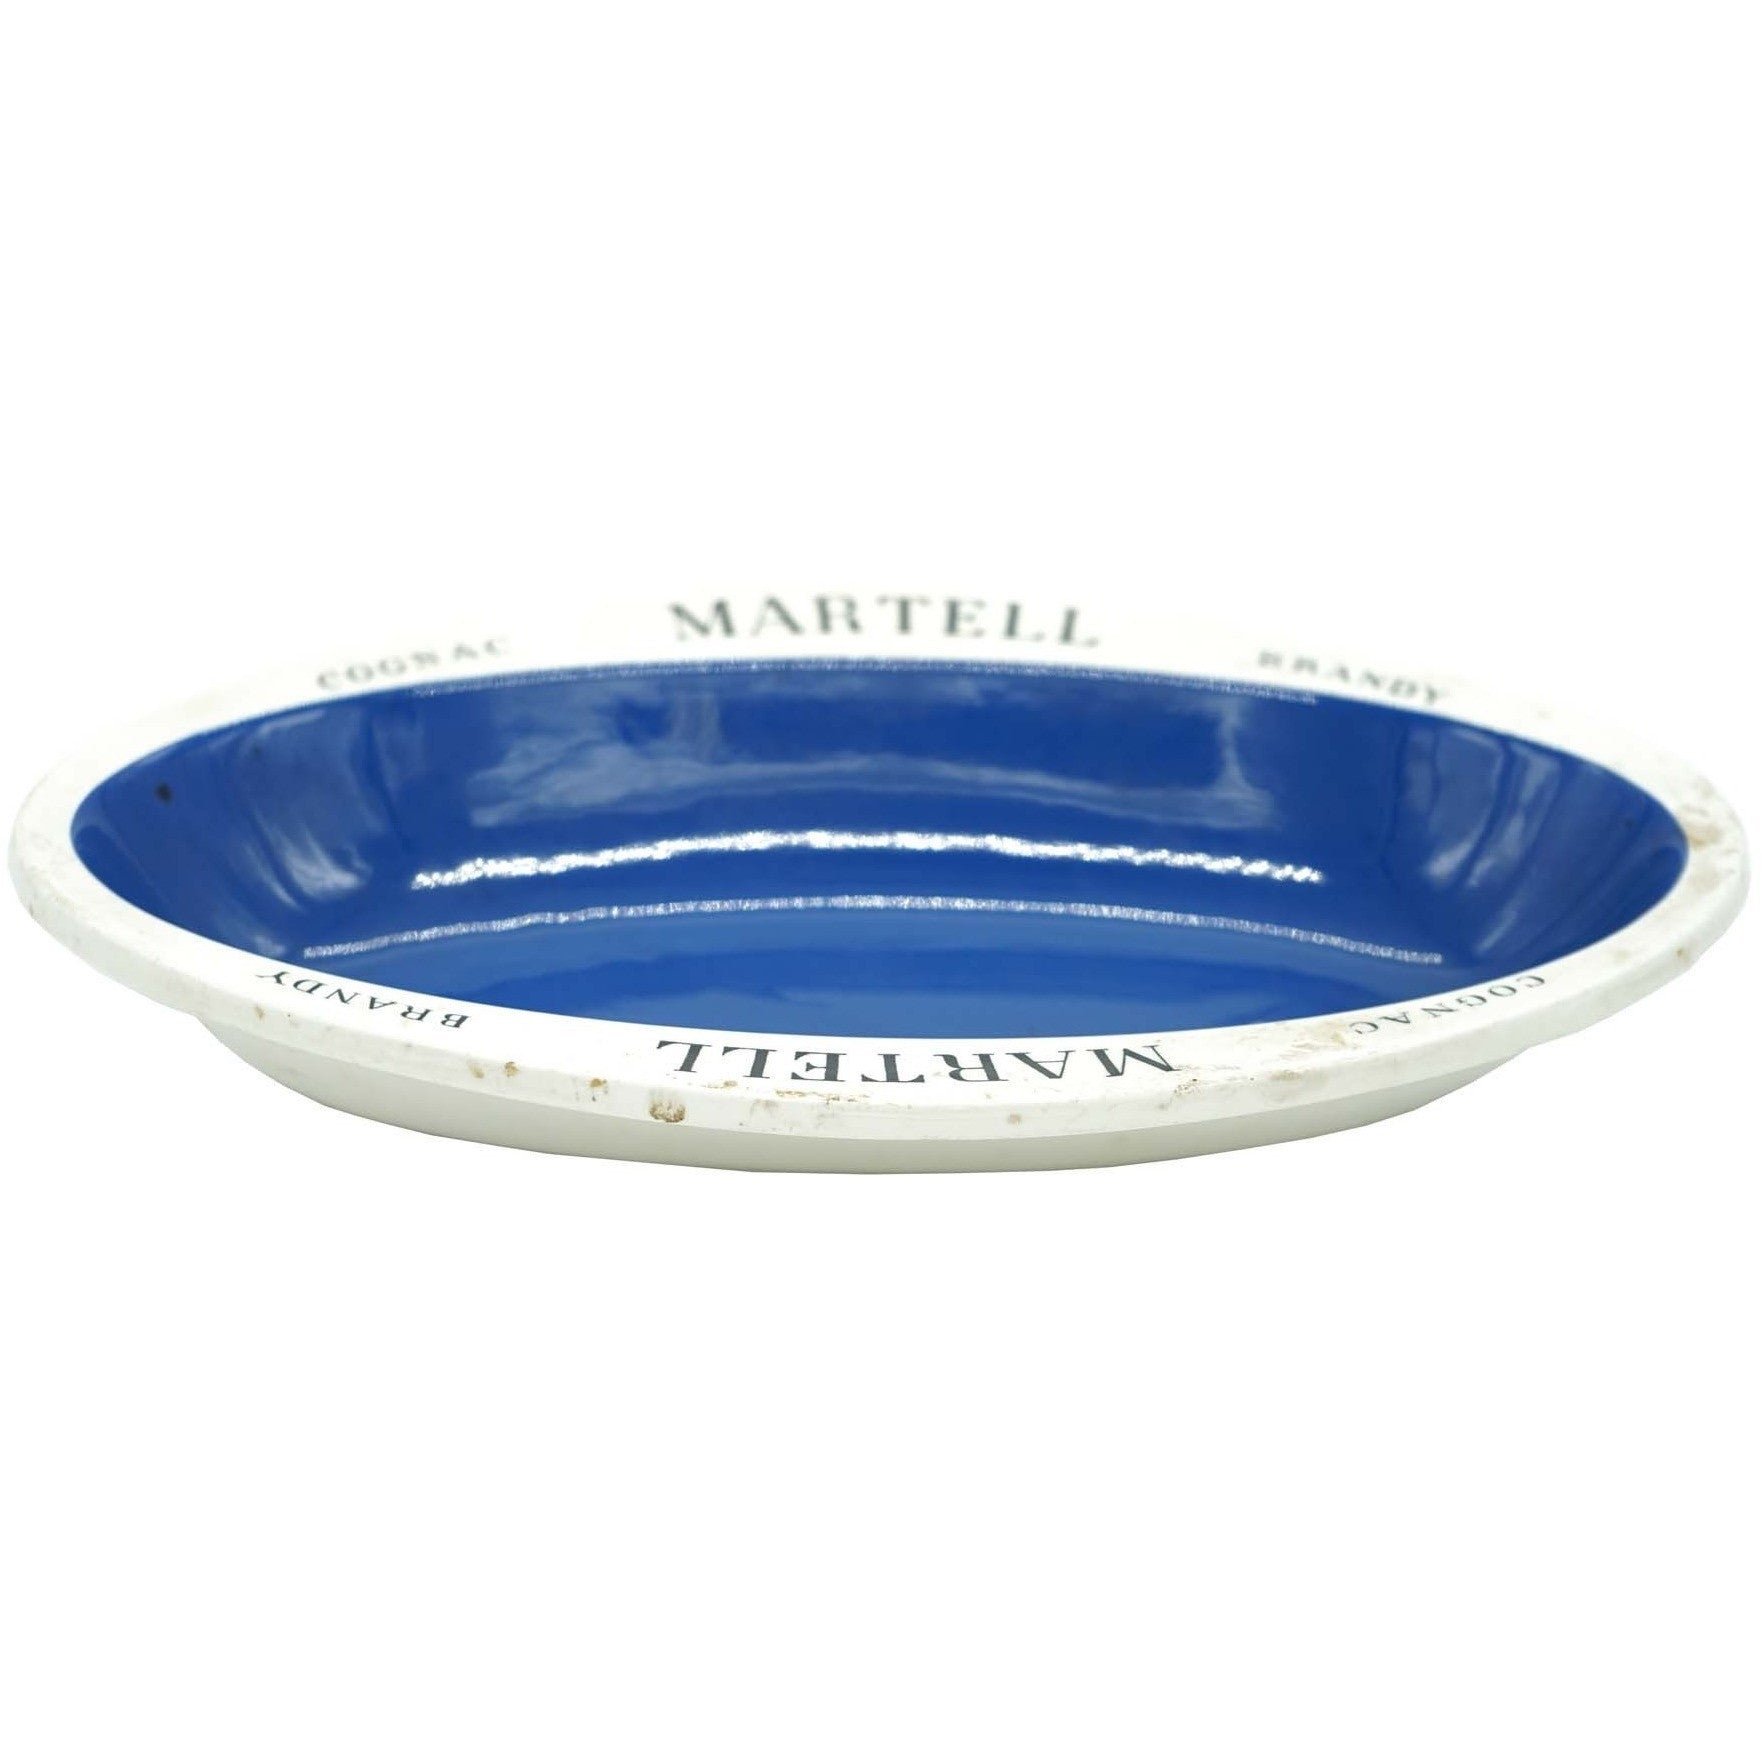 Vintage Cognac Martell Ashtray - Avery, Teach and Co.